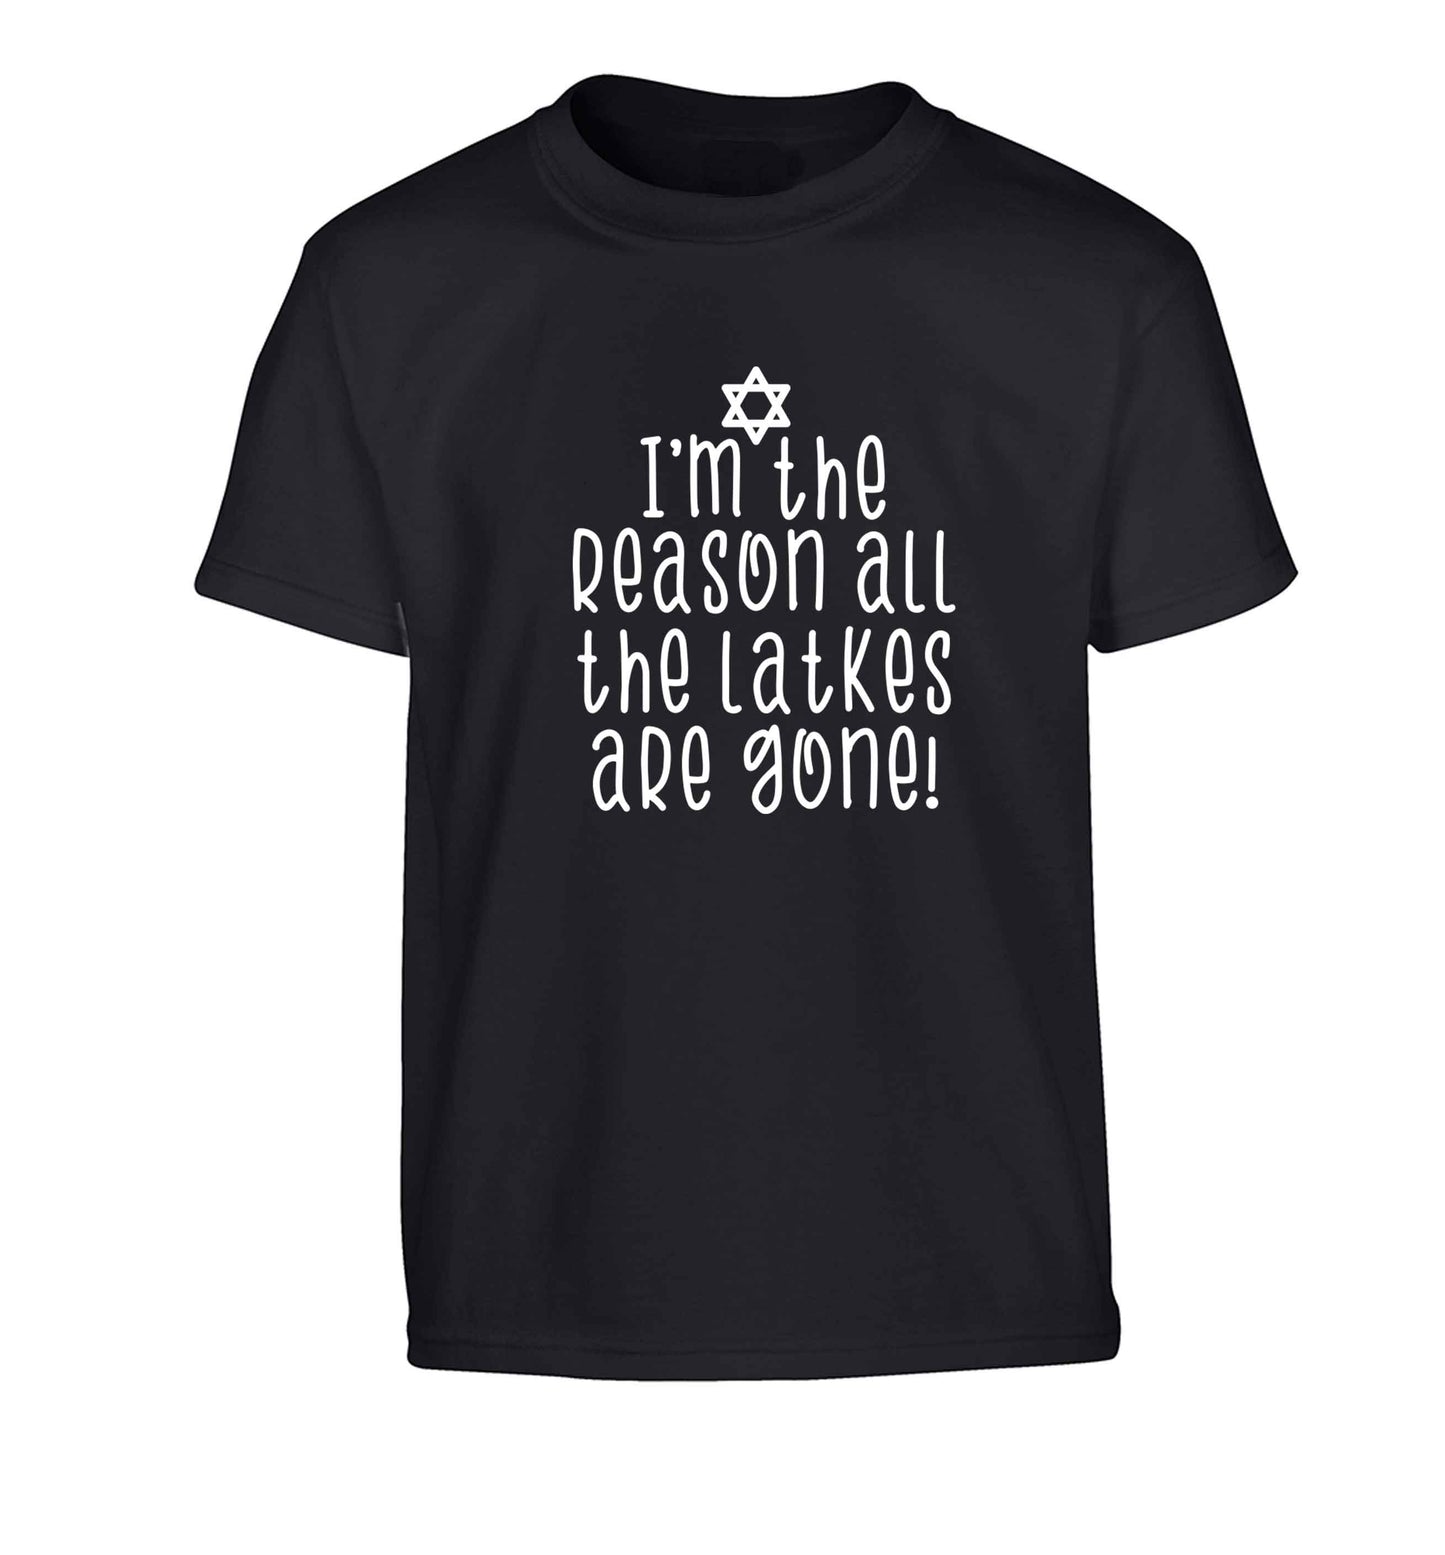 I'm the reason all the latkes are gone Children's black Tshirt 12-13 Years